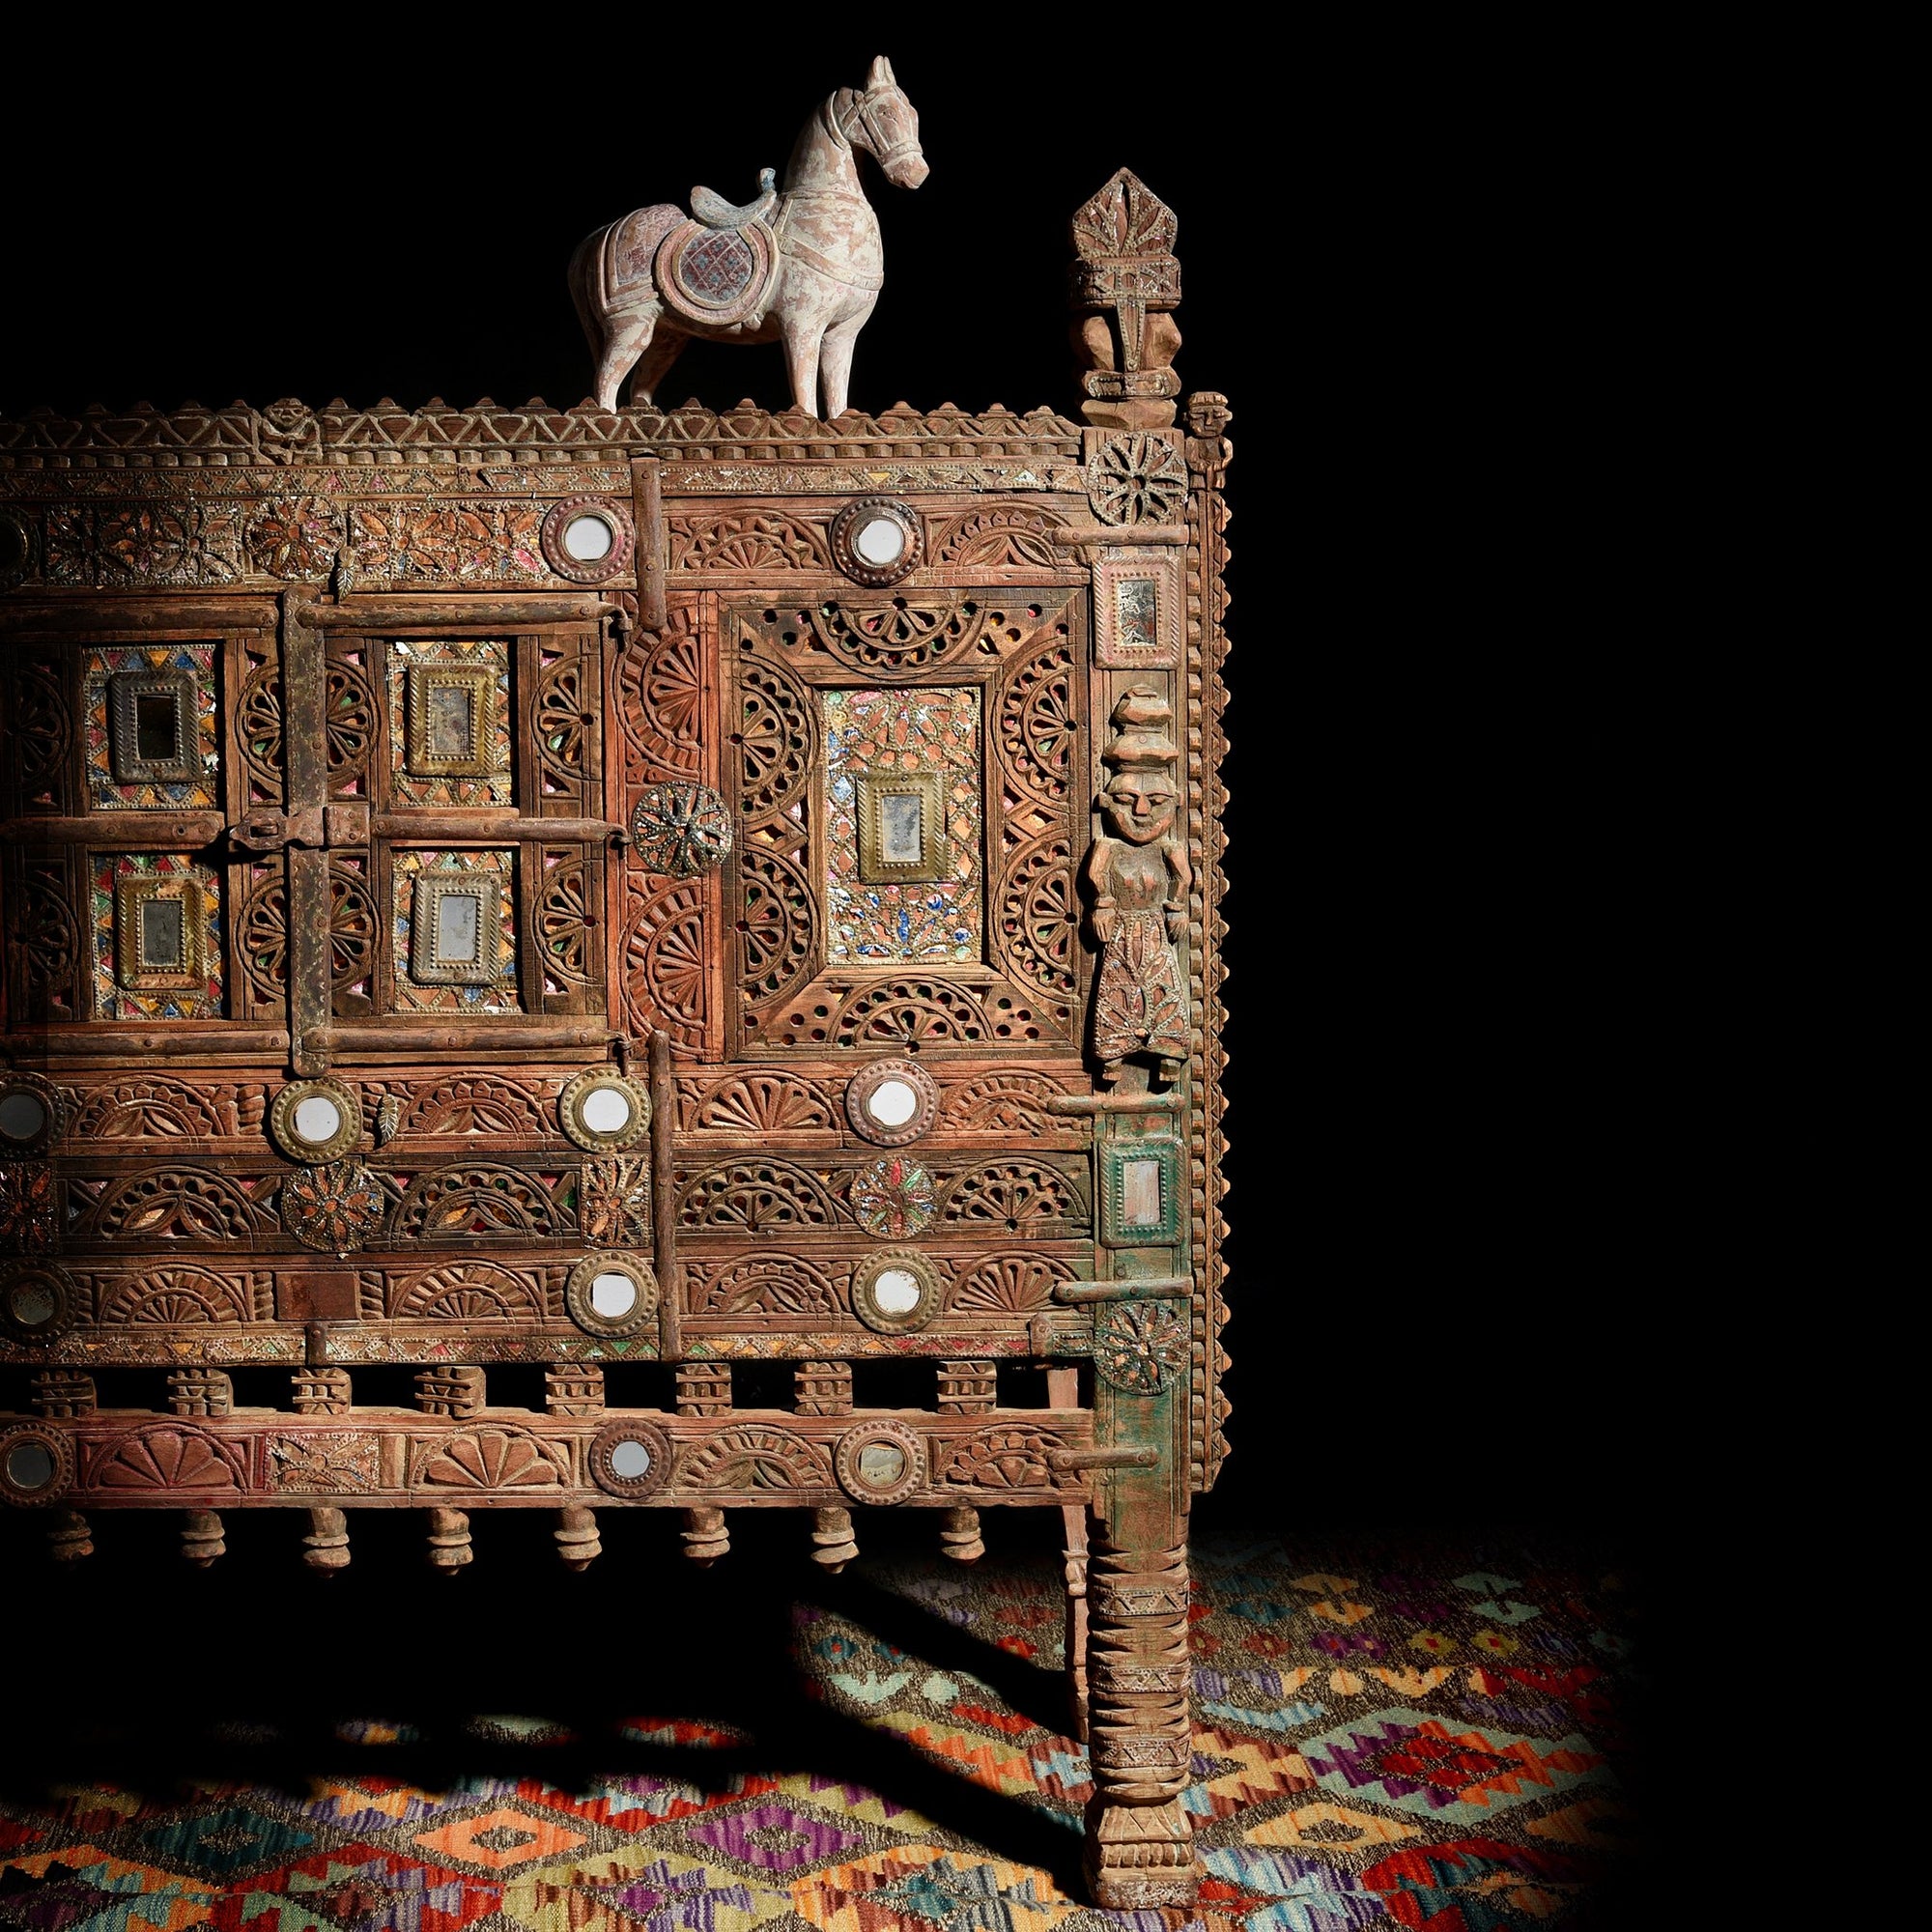 These carved Indian damchiya chests from The Rann of Kutch are classic examples of the furniture in the area. Their beautiful carving and mirror work is unique and they were used as dowry chests.